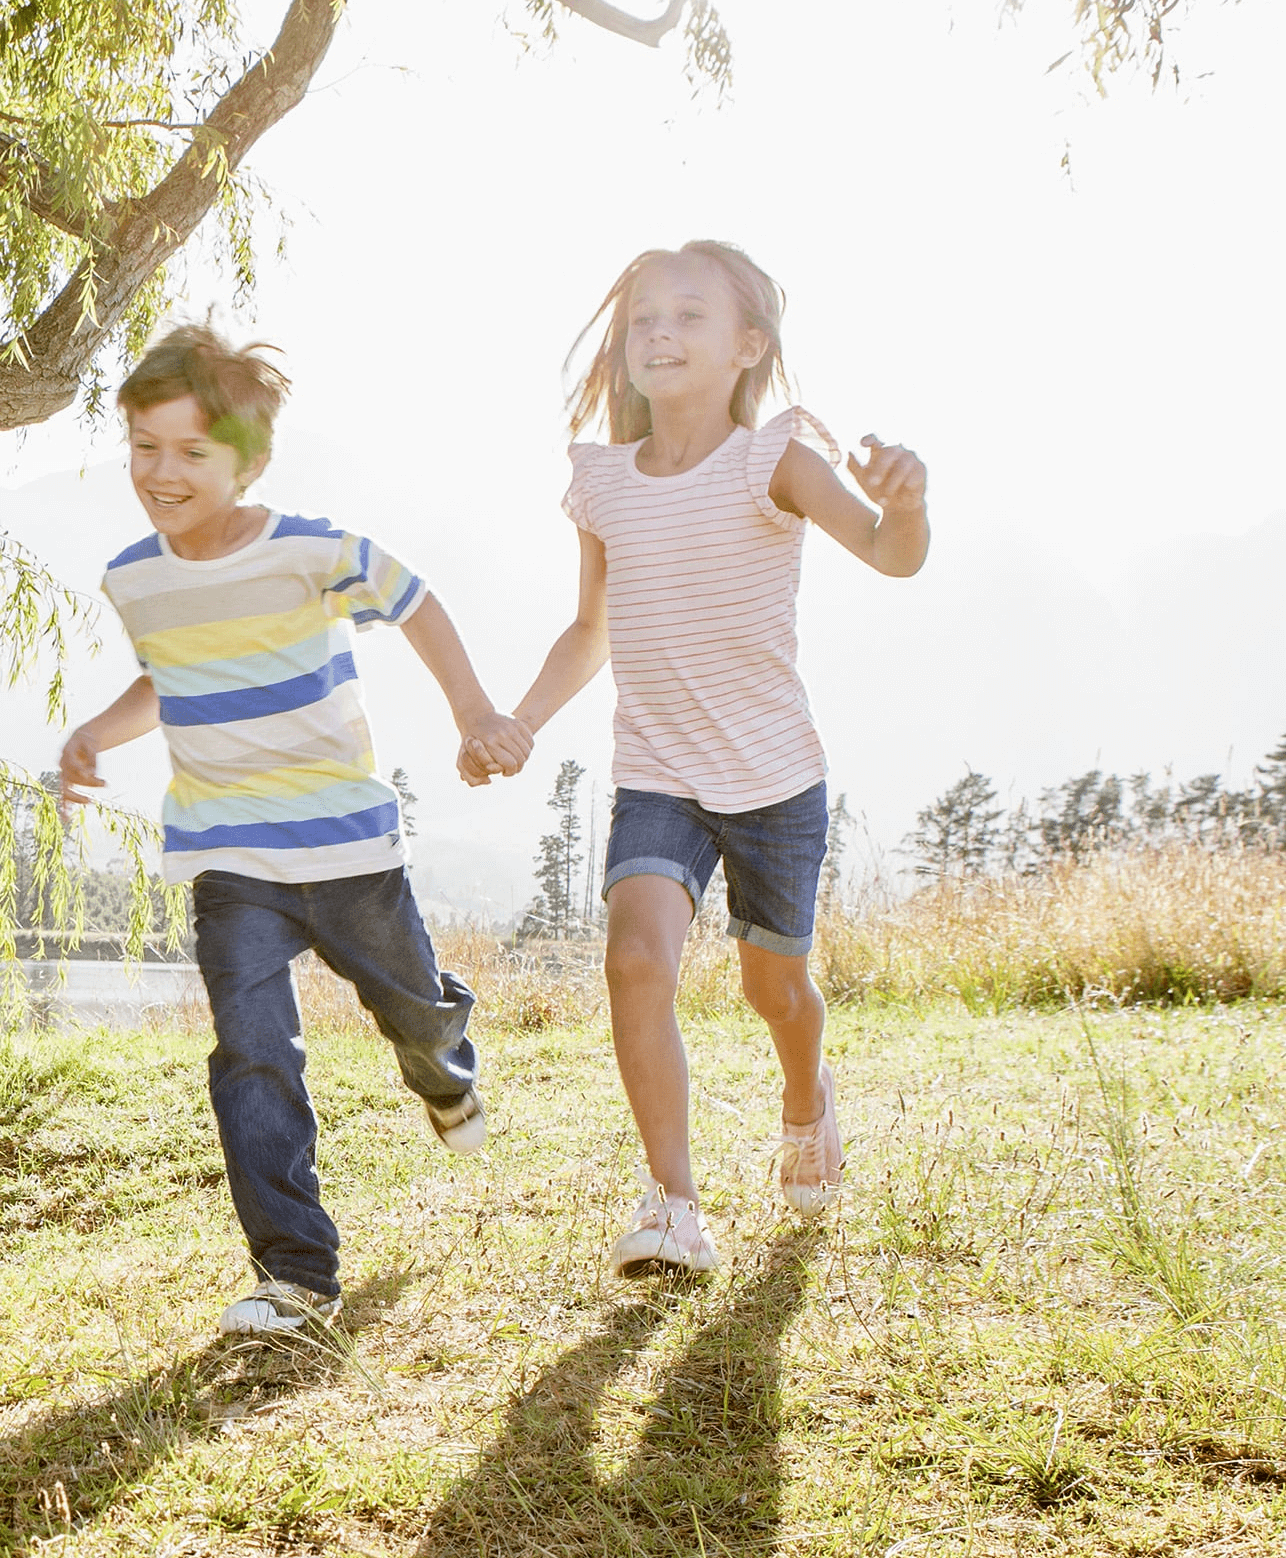 A boy and girl running and playing together with the sun shining behind them